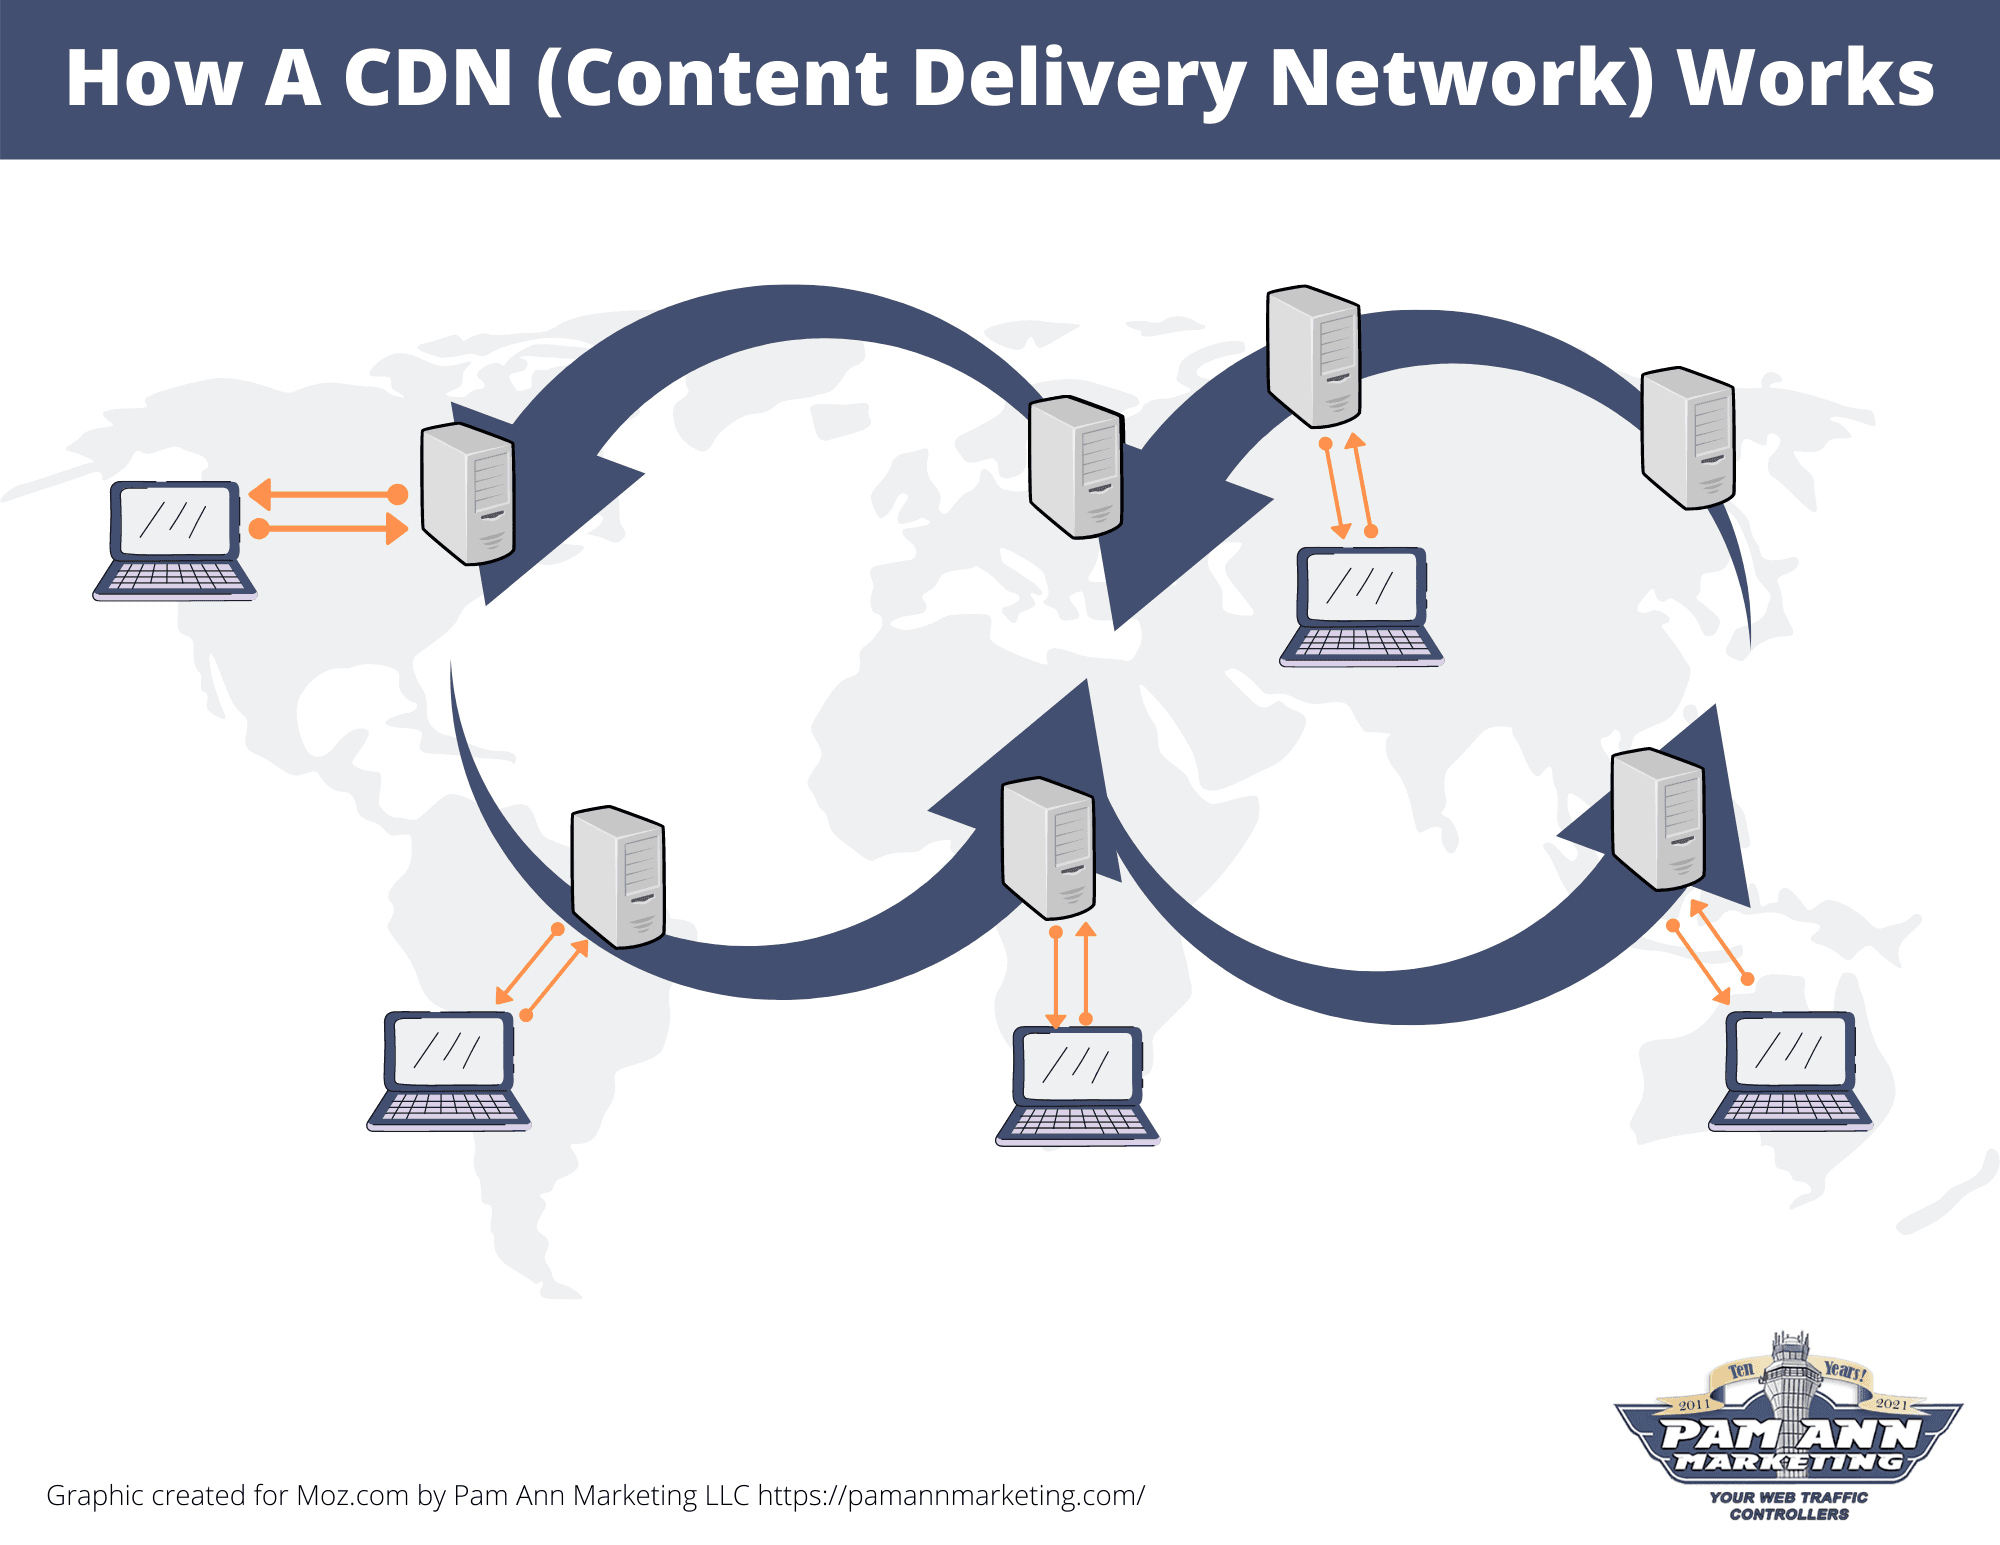 Visual showing how a content delivery network works.